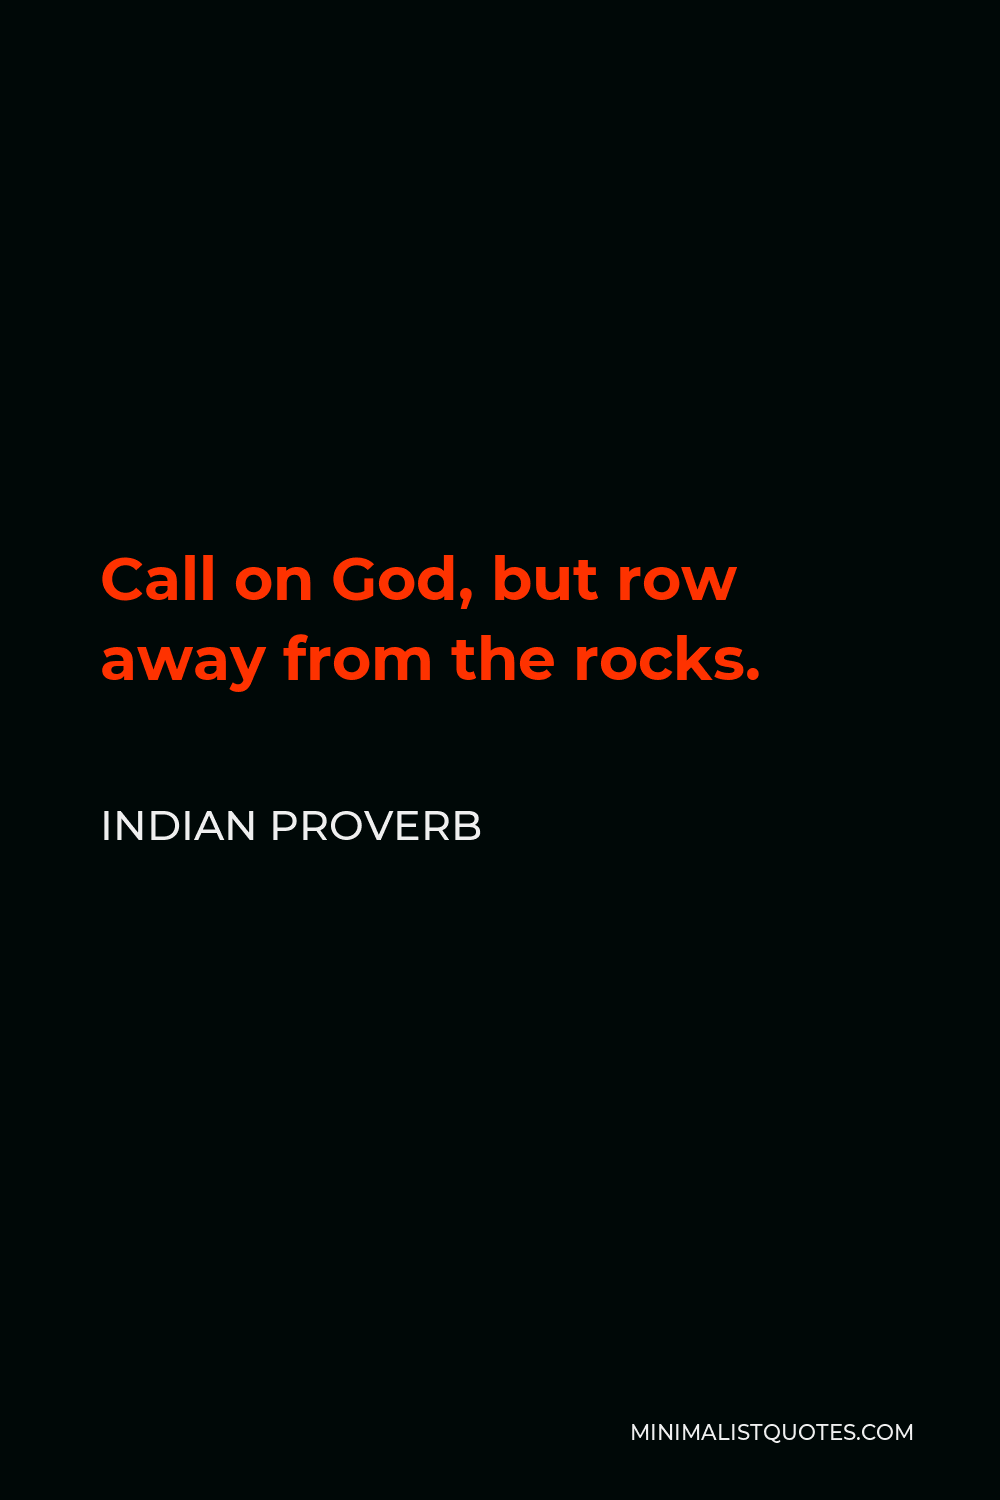 Indian Proverb Quote - Call on God, but row away from the rocks.